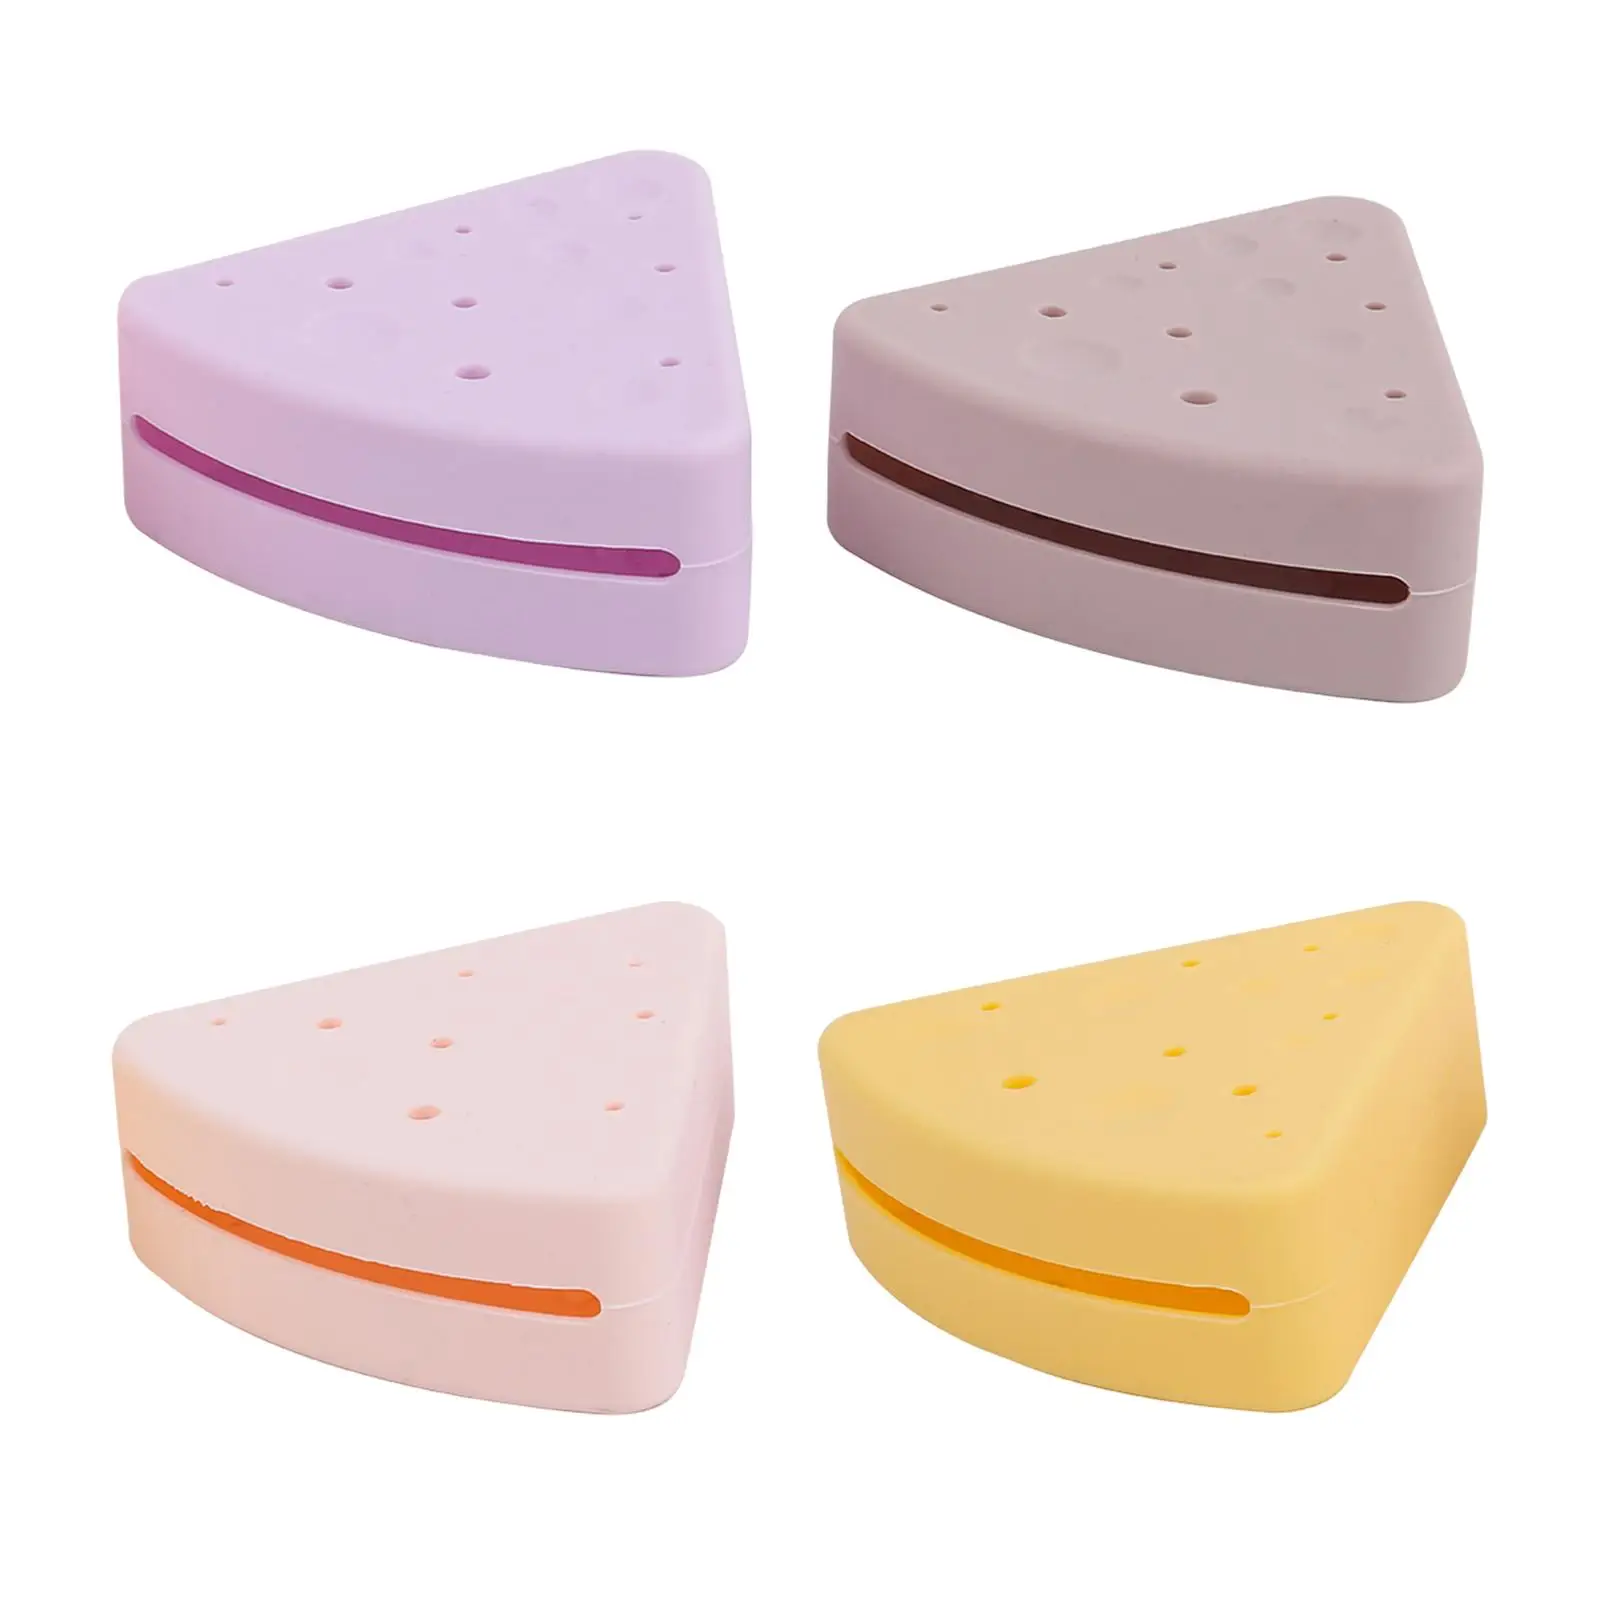 Triangle Makeup Sponge Holder Portable Compact Powder Puff Case for Travel